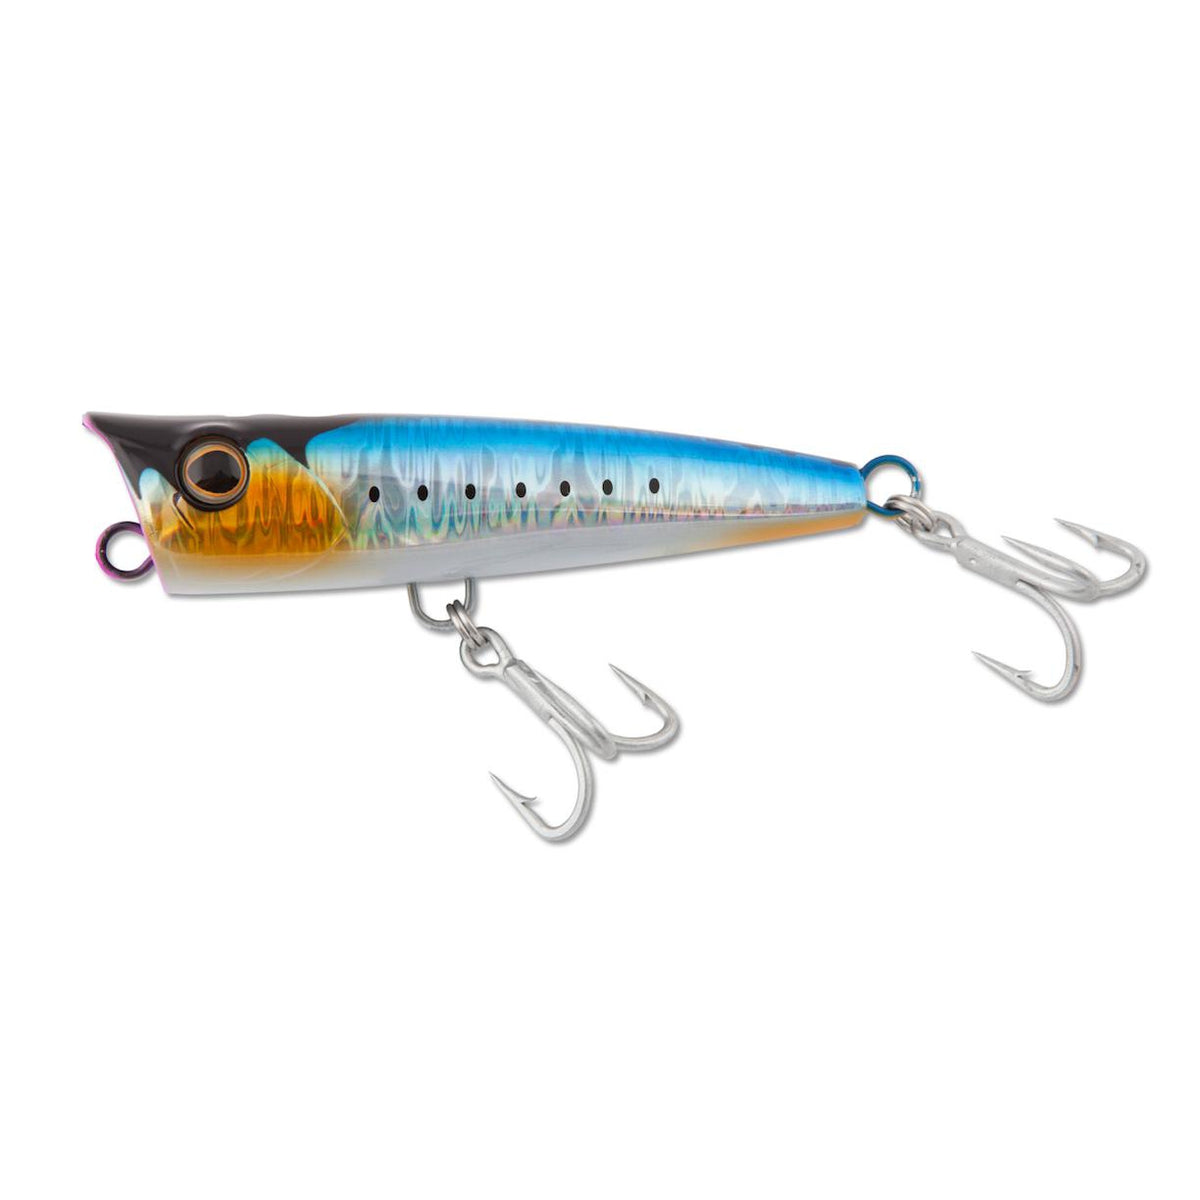 Smashdit Saltwater Popper Lure Topwater Popper Lure India